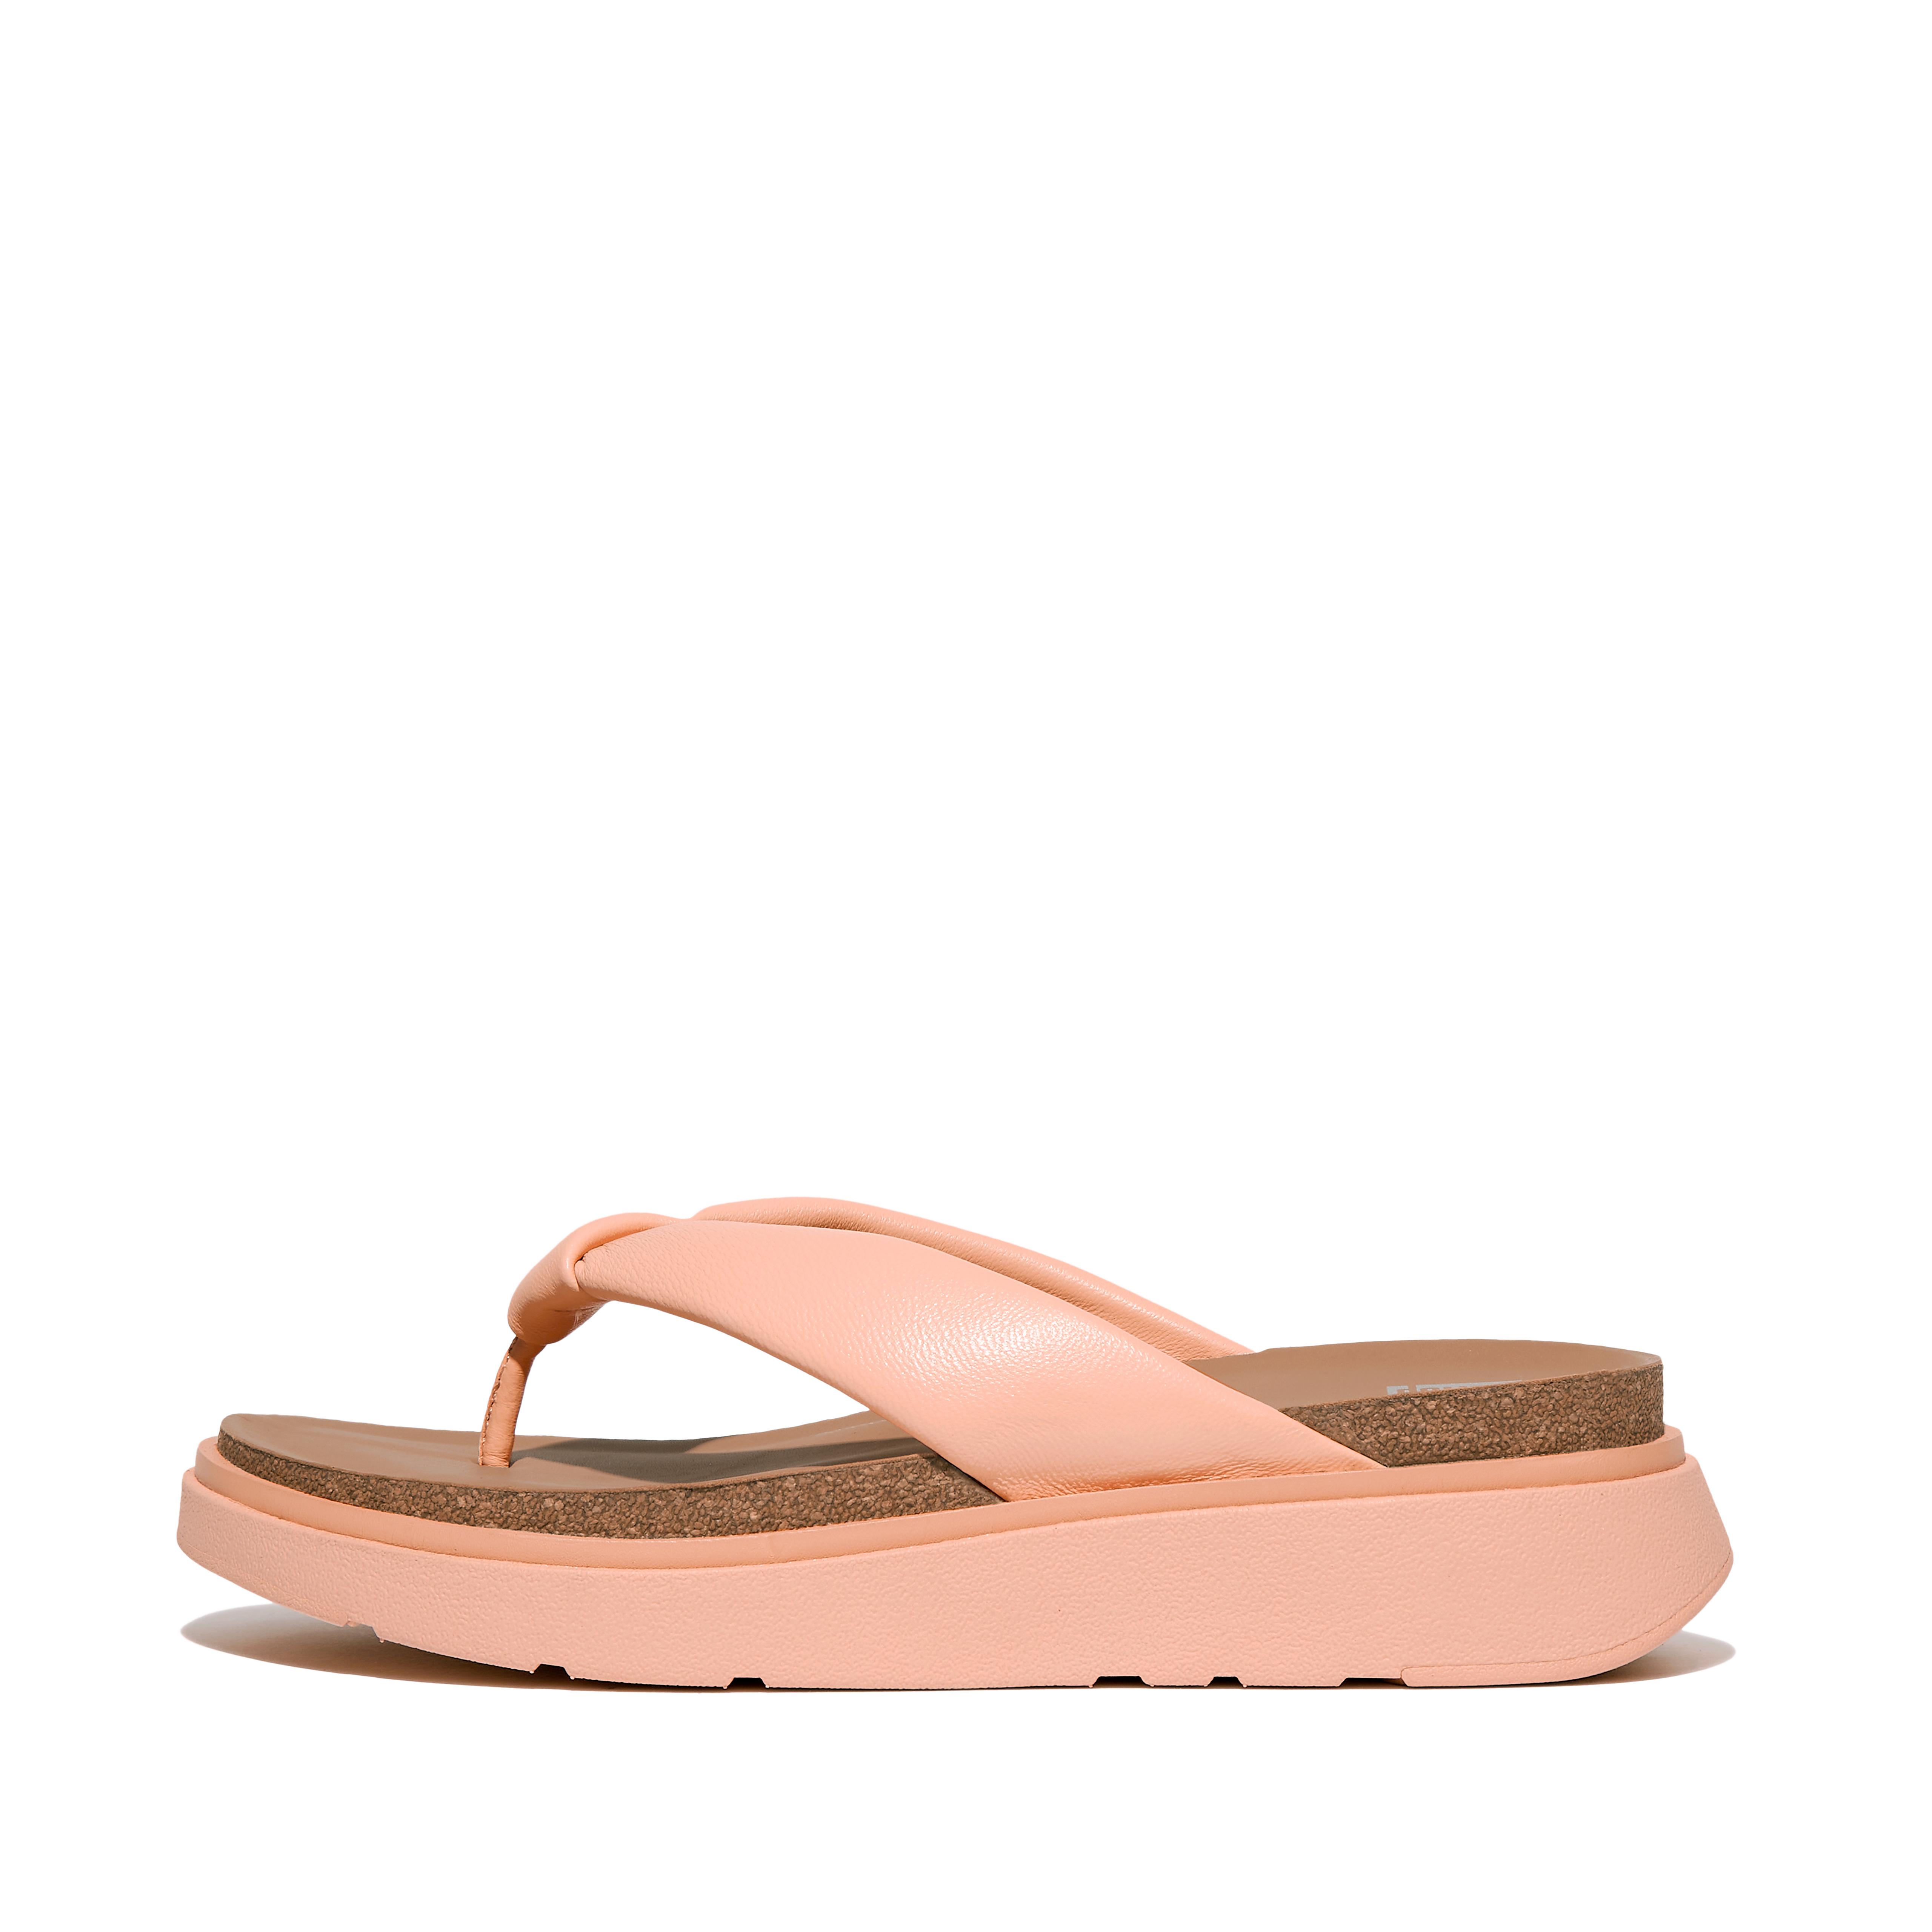 Fitflop Padded-Strap Leather Toe-Post Sandals,Blushy